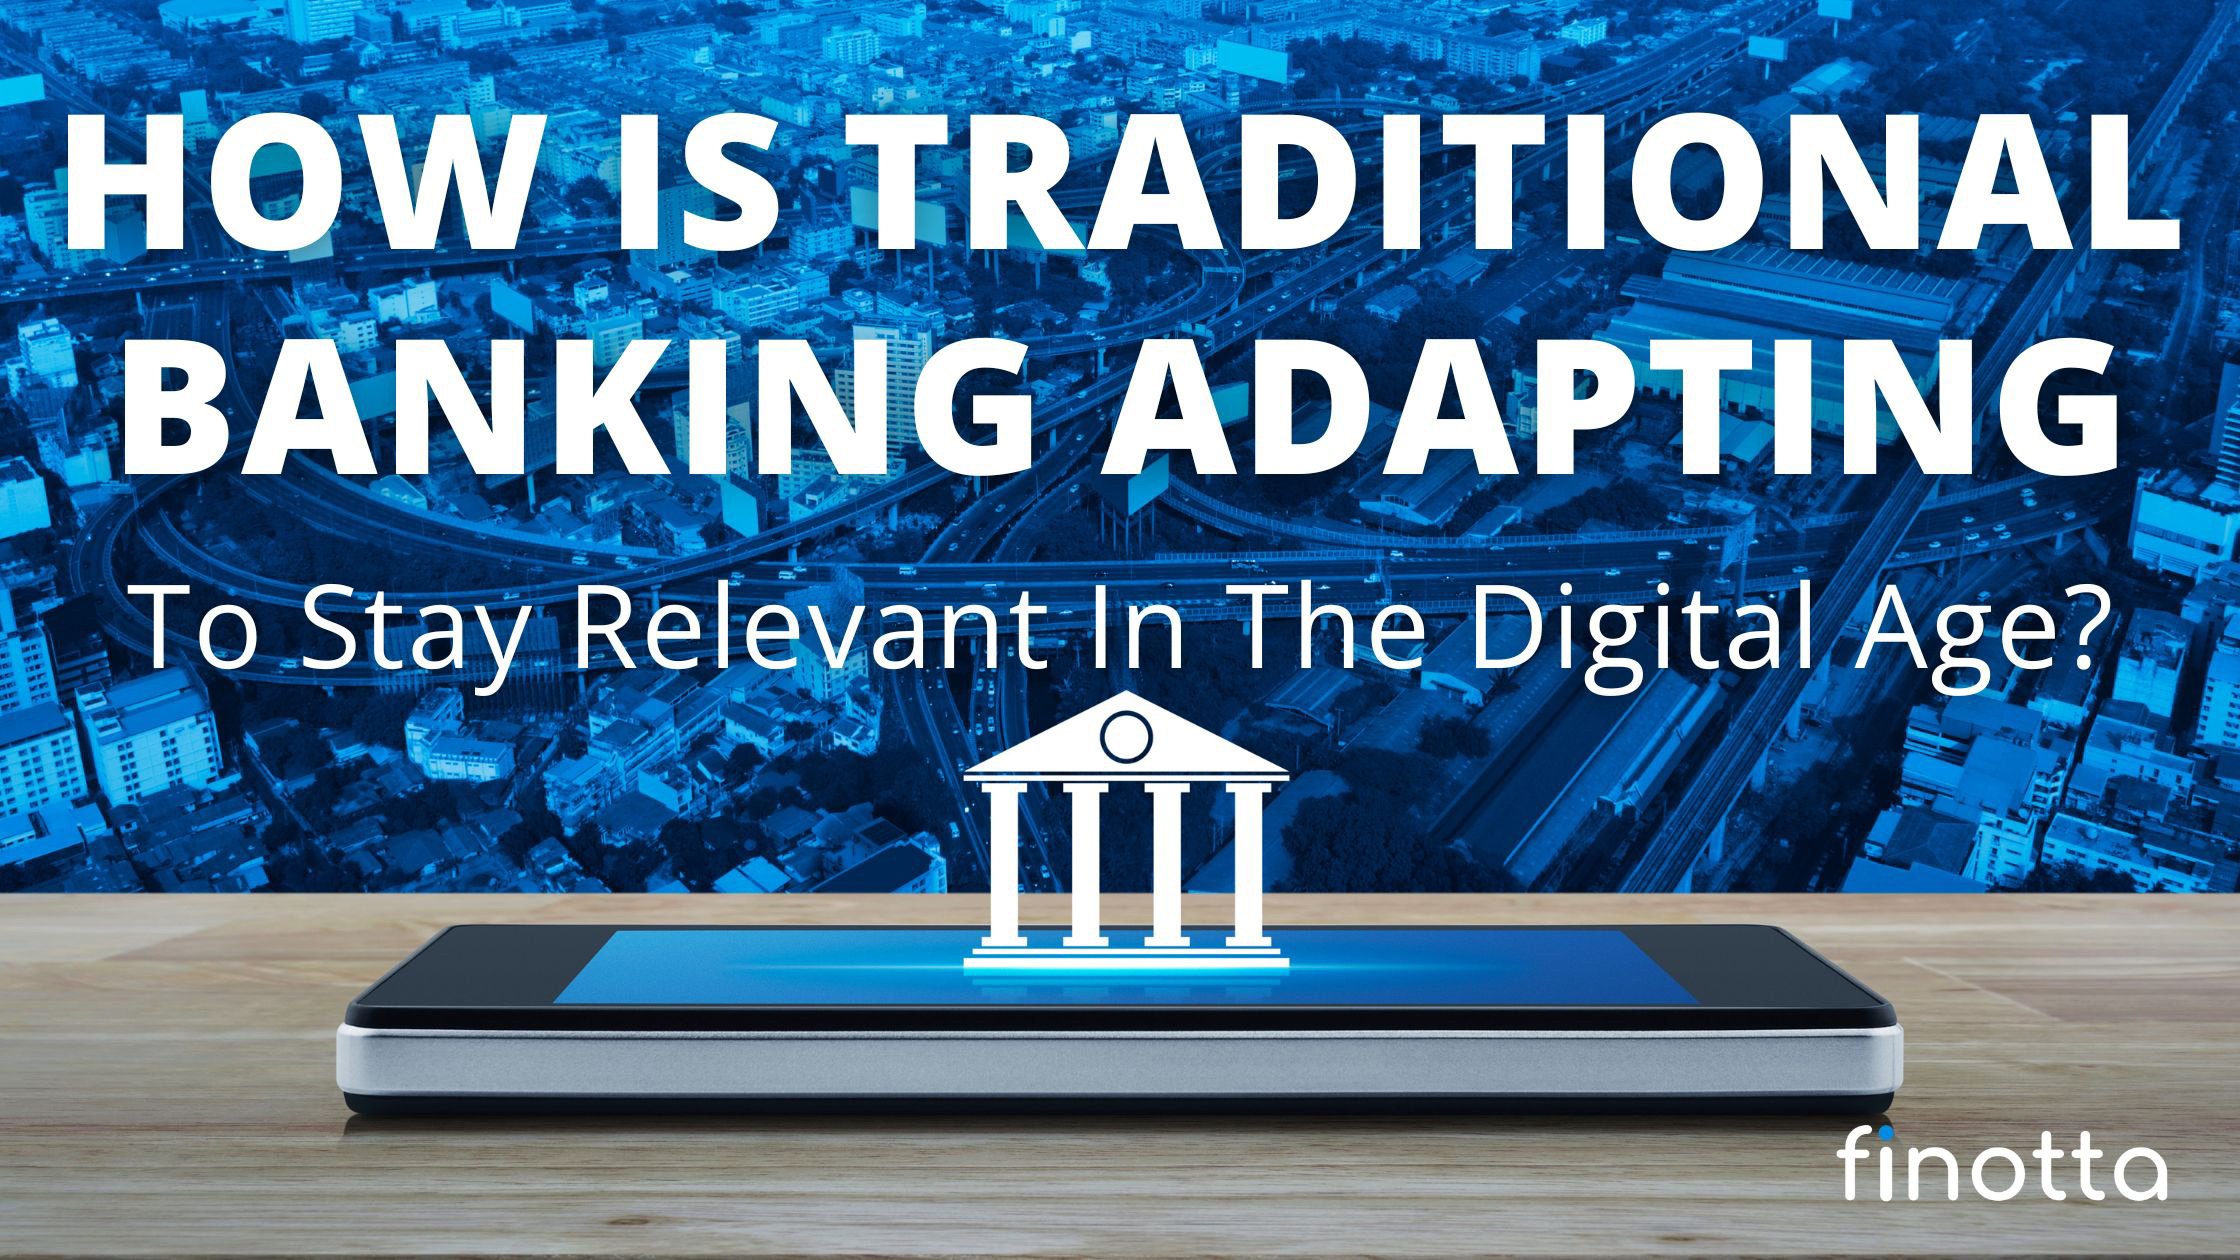 How Is Traditional Banking Adapting To Stay Relevant In The Digital Age?